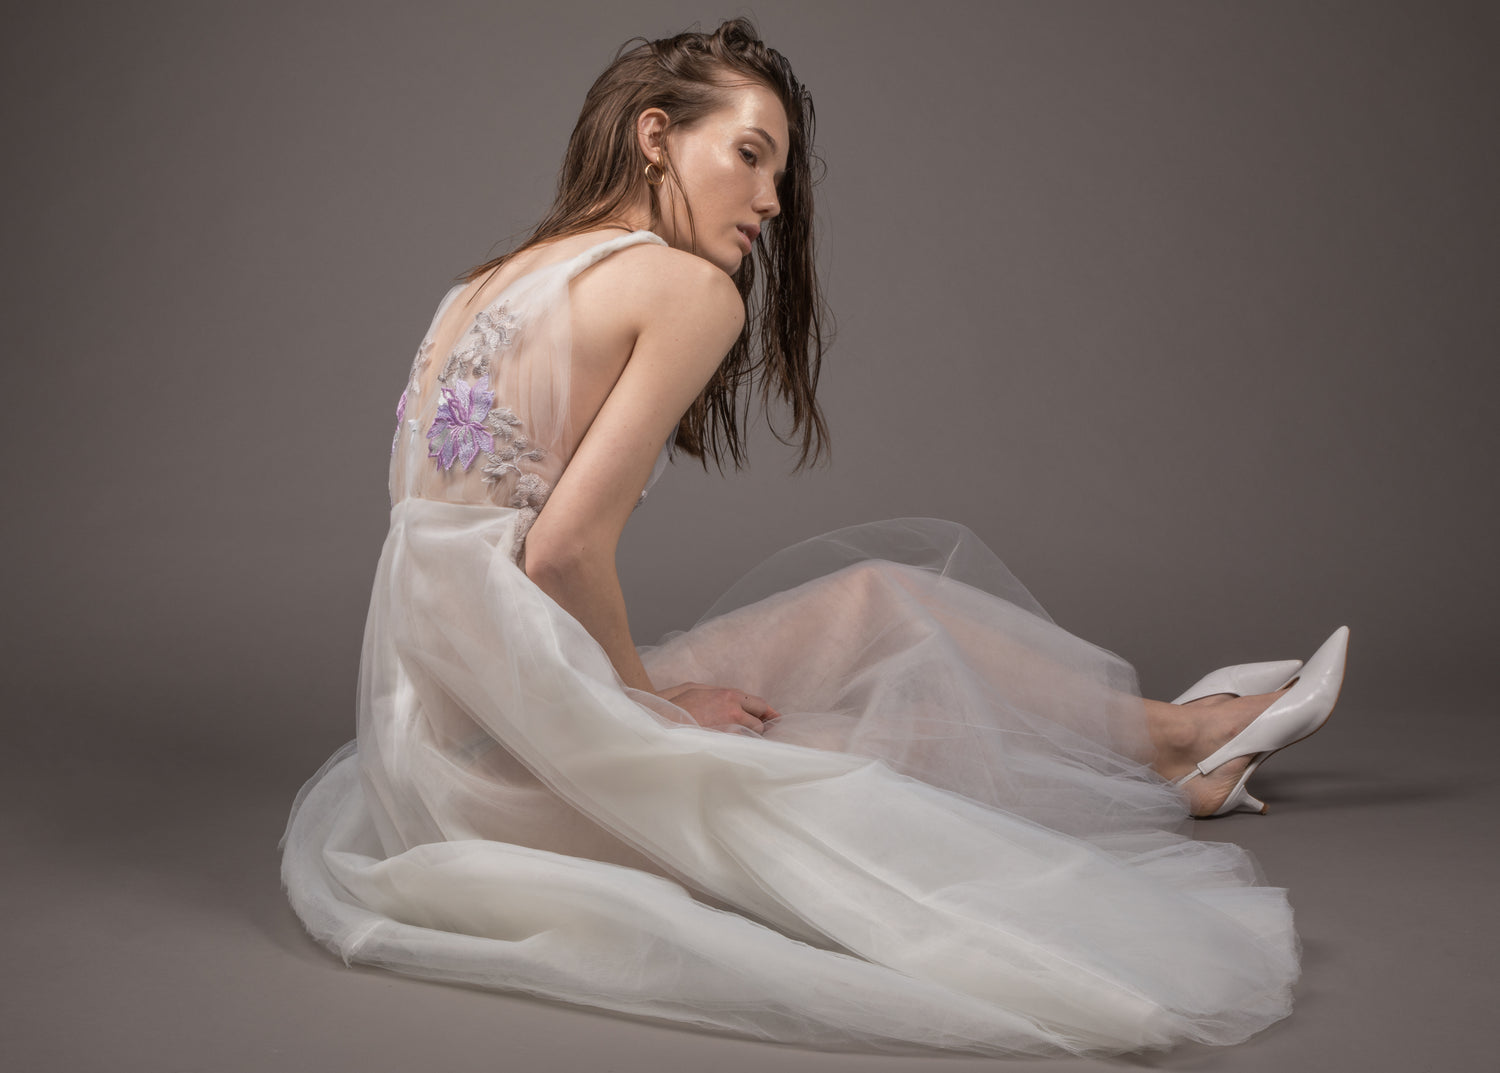 white tulle dress with flower embroidery created in 2018 by Rene Mejia